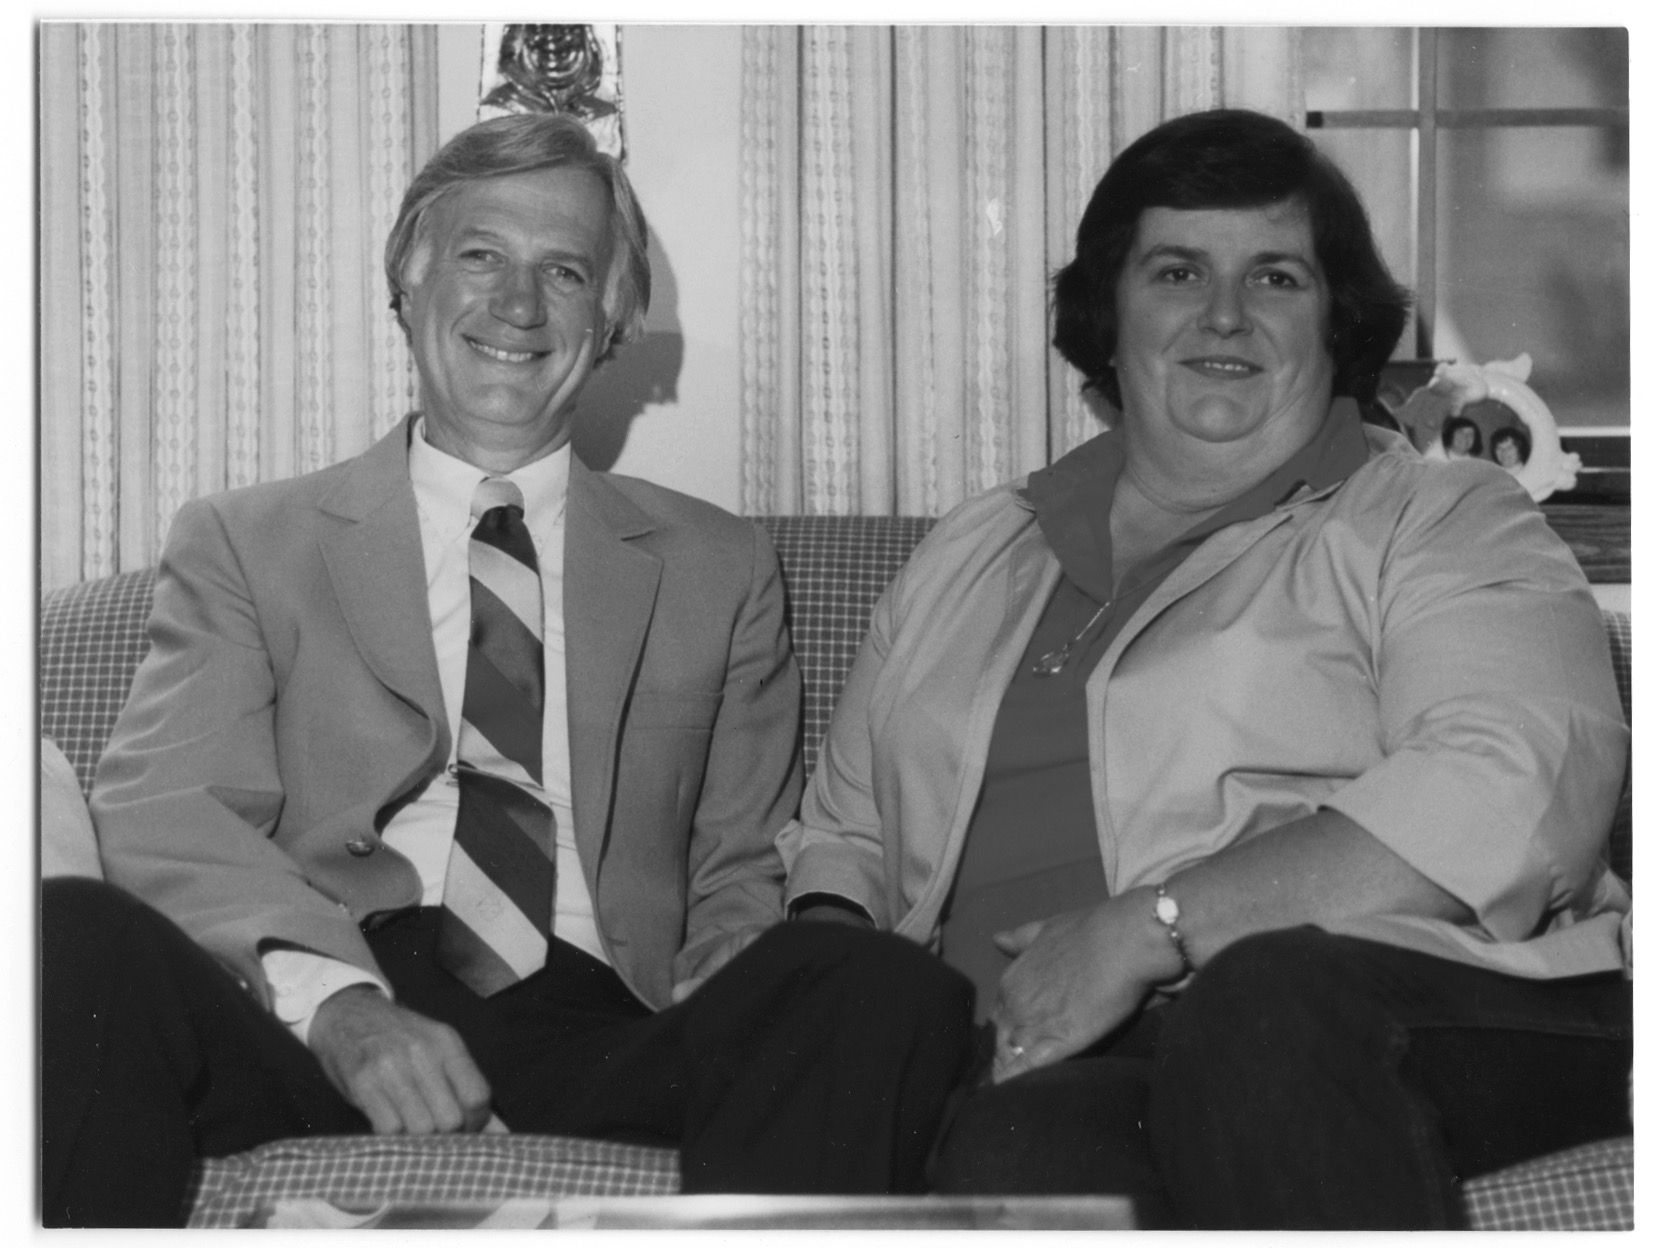 A black and white photograph of Roger and Annette Brandstetter